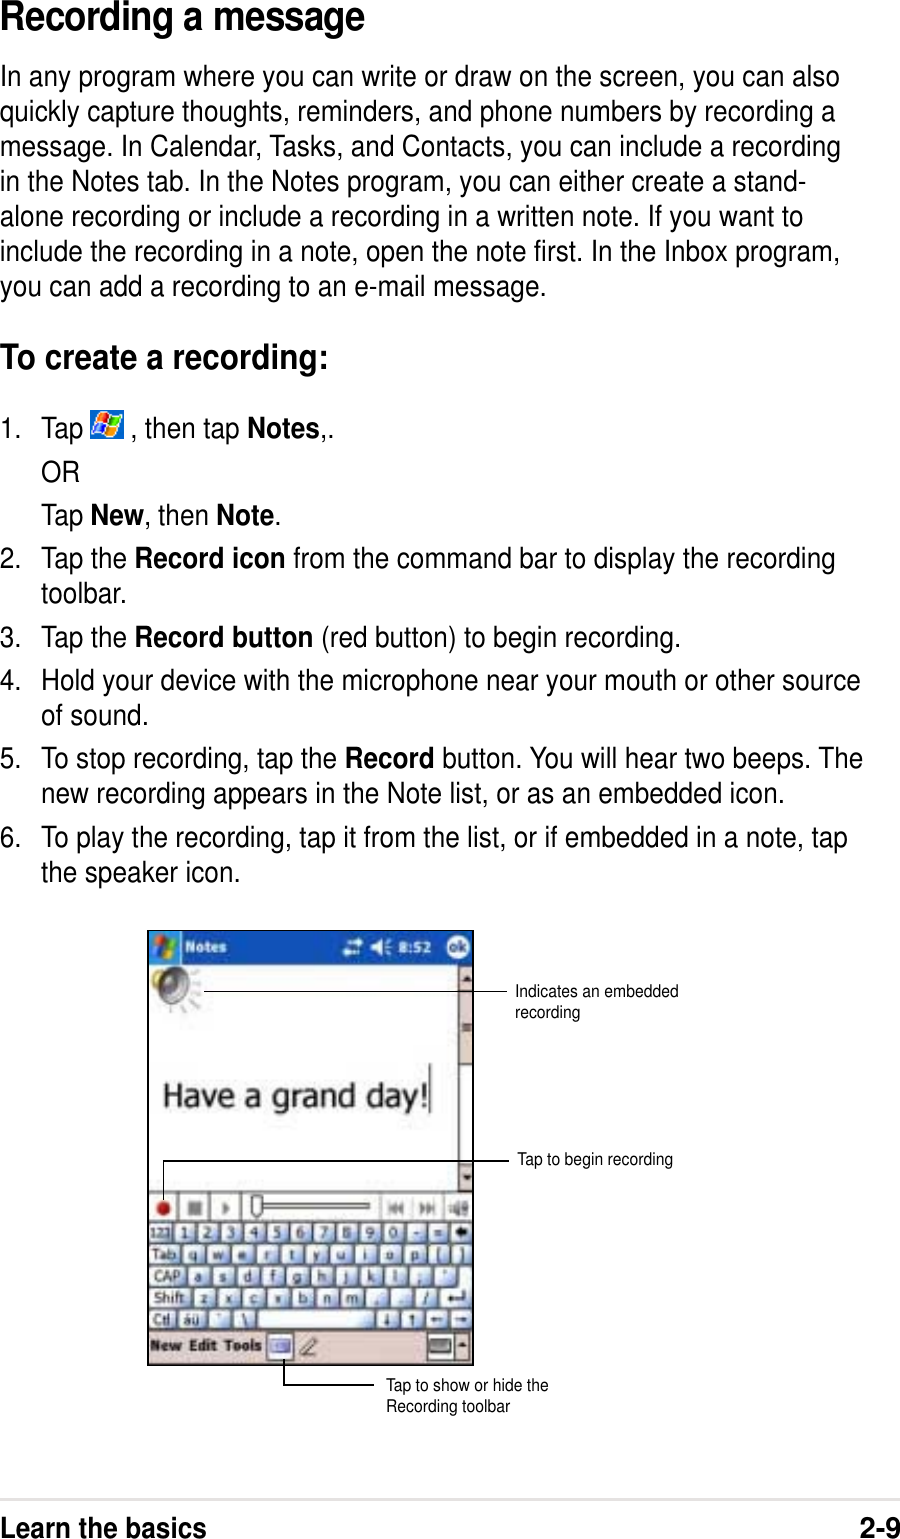 Learn the basics2-9Recording a messageIn any program where you can write or draw on the screen, you can alsoquickly capture thoughts, reminders, and phone numbers by recording amessage. In Calendar, Tasks, and Contacts, you can include a recordingin the Notes tab. In the Notes program, you can either create a stand-alone recording or include a recording in a written note. If you want toinclude the recording in a note, open the note first. In the Inbox program,you can add a recording to an e-mail message.To create a recording:1. Tap   , then tap Notes,.ORTap New, then Note.2. Tap the Record icon from the command bar to display the recordingtoolbar.3. Tap the Record button (red button) to begin recording.4. Hold your device with the microphone near your mouth or other sourceof sound.5. To stop recording, tap the Record button. You will hear two beeps. Thenew recording appears in the Note list, or as an embedded icon.6. To play the recording, tap it from the list, or if embedded in a note, tapthe speaker icon.Indicates an embeddedrecordingTap to show or hide theRecording toolbarTap to begin recording